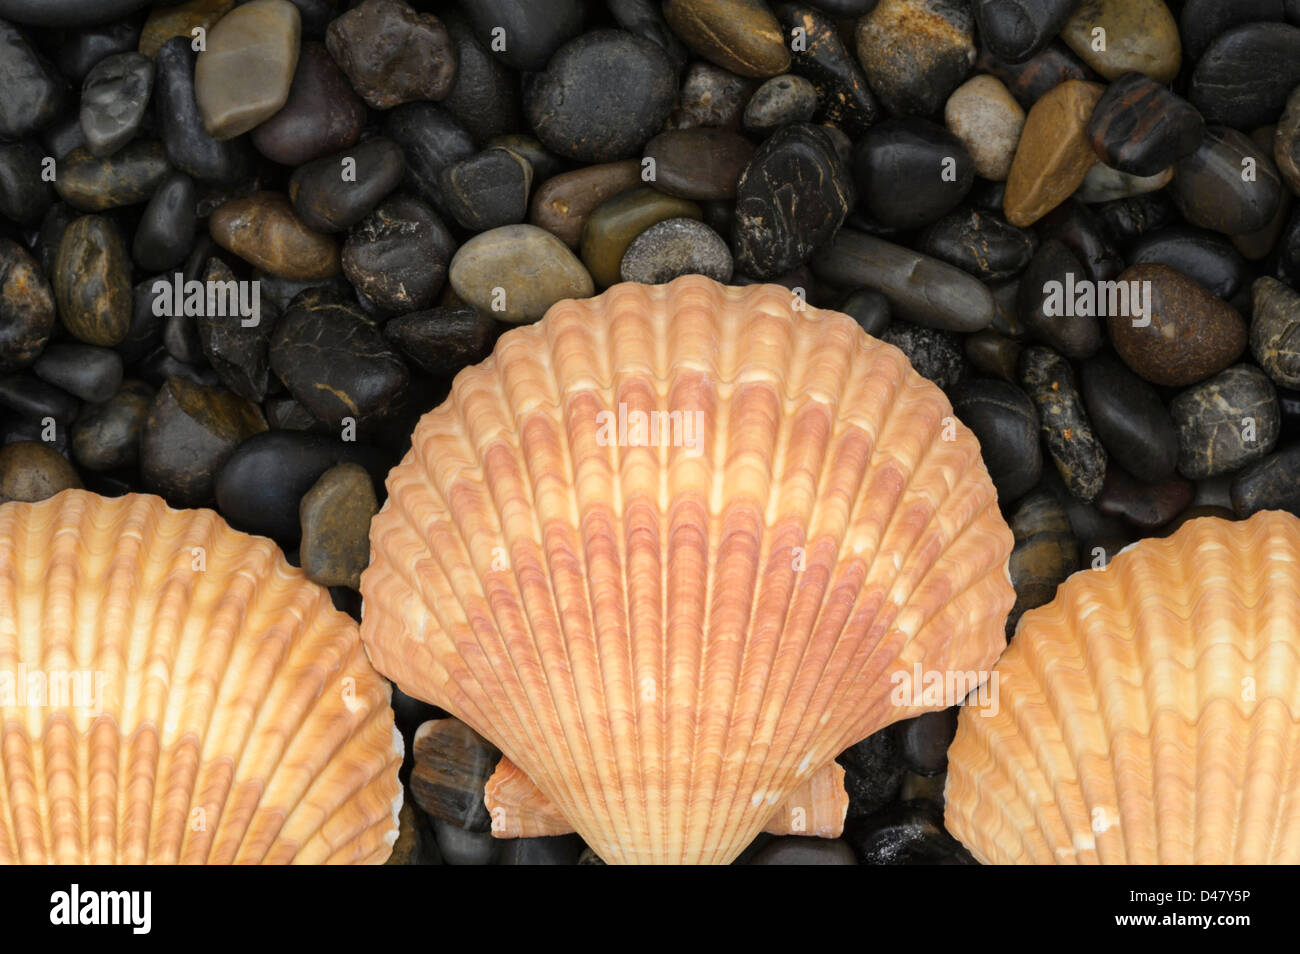 https://c8.alamy.com/comp/D47Y5P/three-golden-colored-sea-shells-clam-shells-on-a-black-stone-background-D47Y5P.jpg